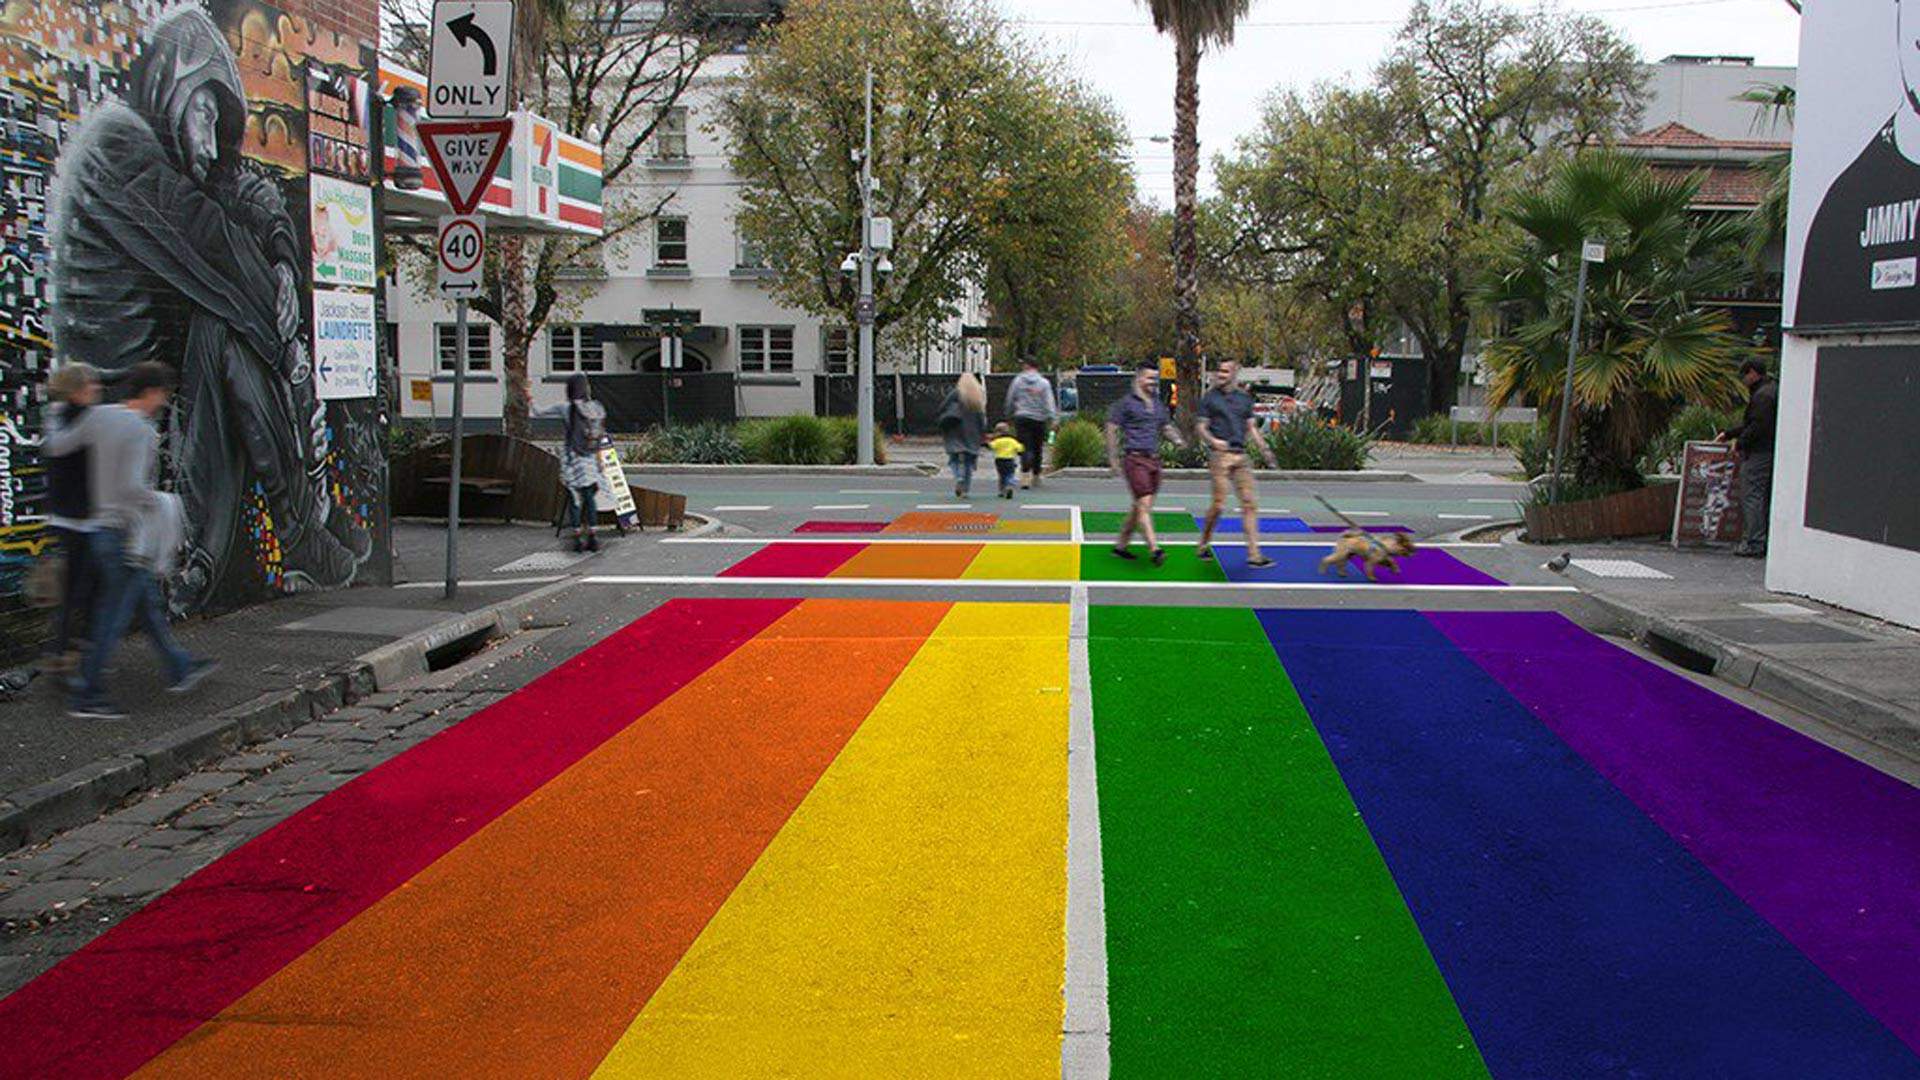 St Kilda Will Soon Be Home to a Fabulous Rainbow Road